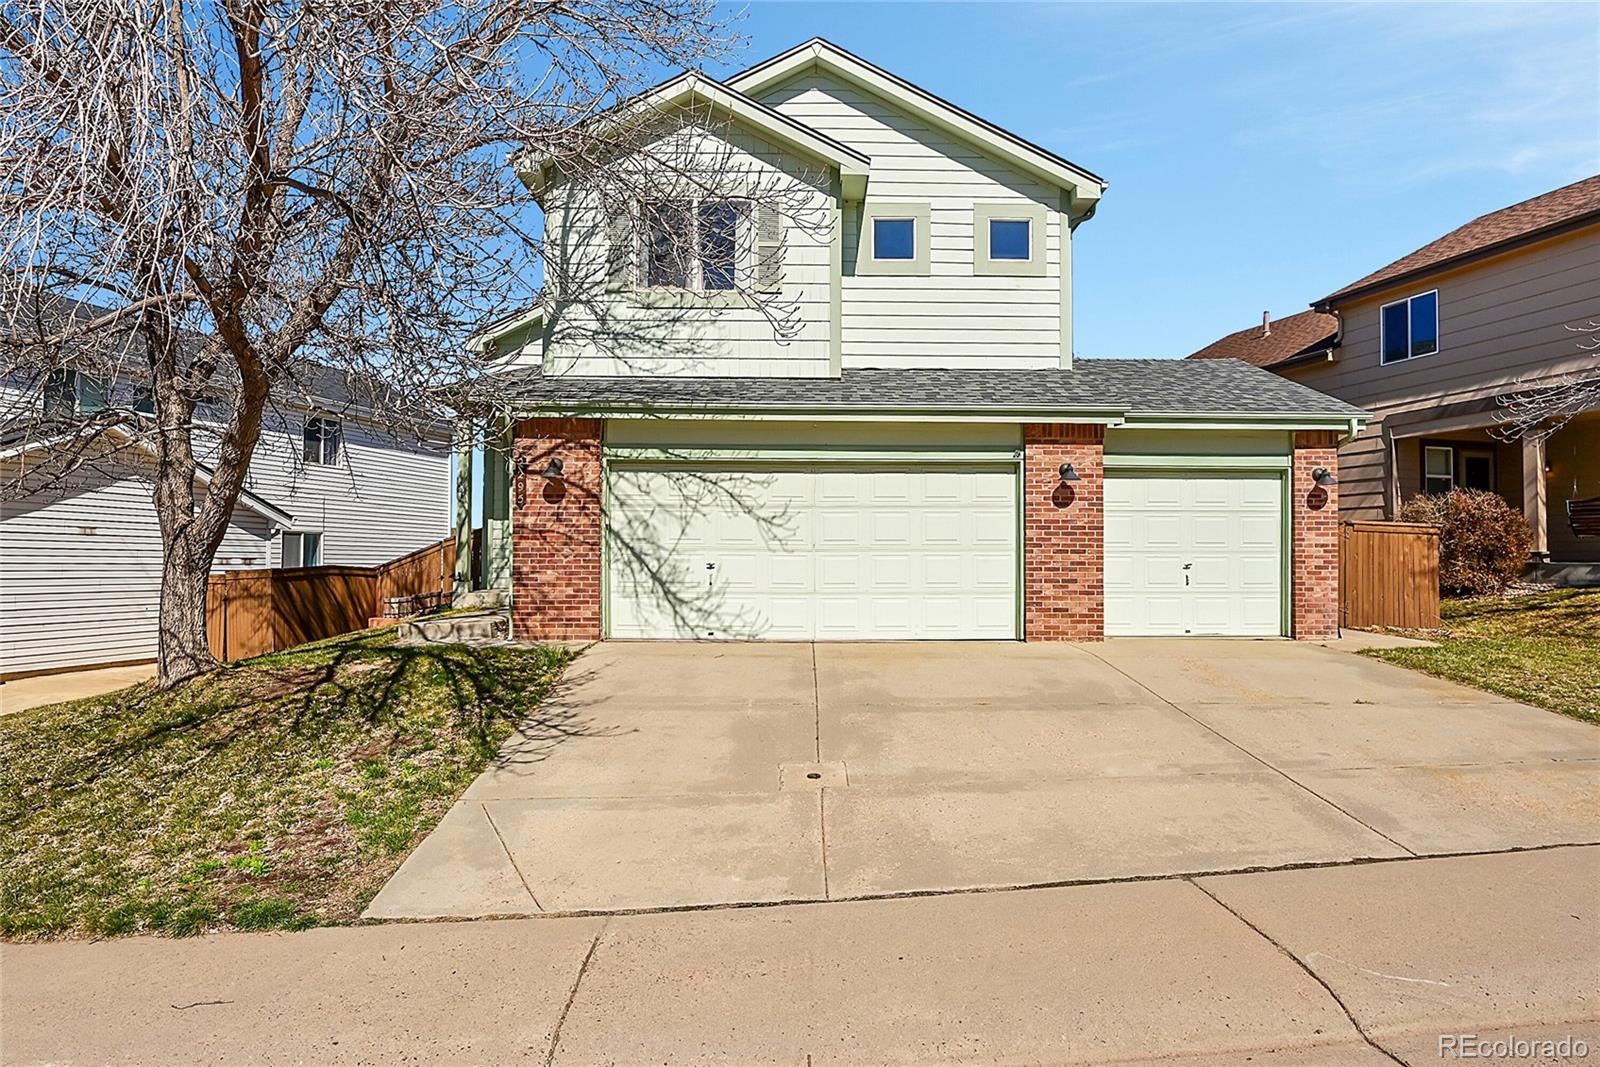 2295  hyacinth road, Highlands Ranch sold home. Closed on 2024-04-19 for $631,000.